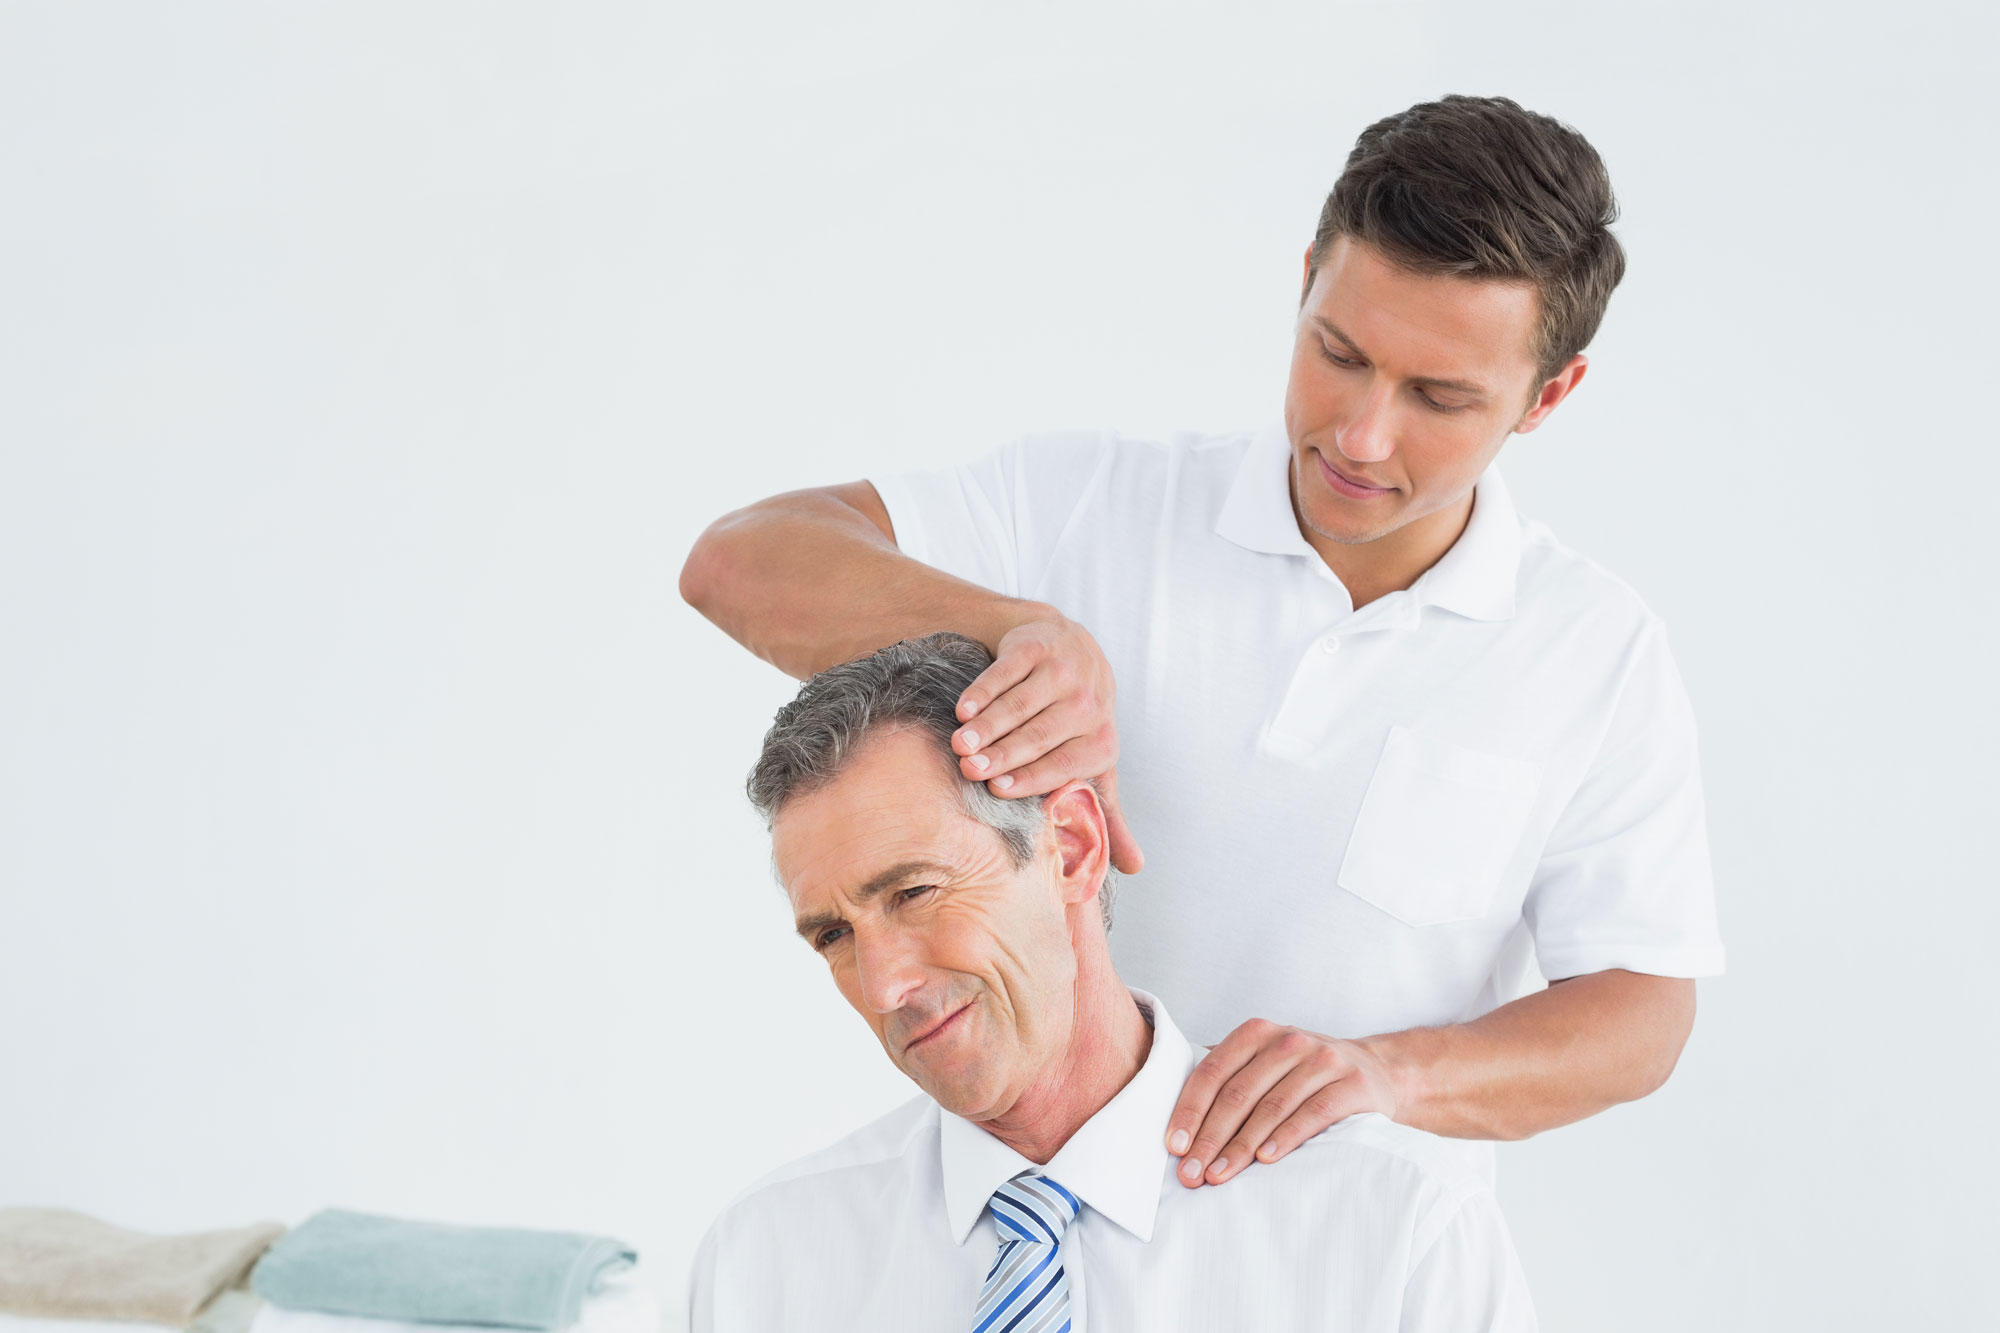 most amazing healthcare professions and chiropractic team taking a holistic approach